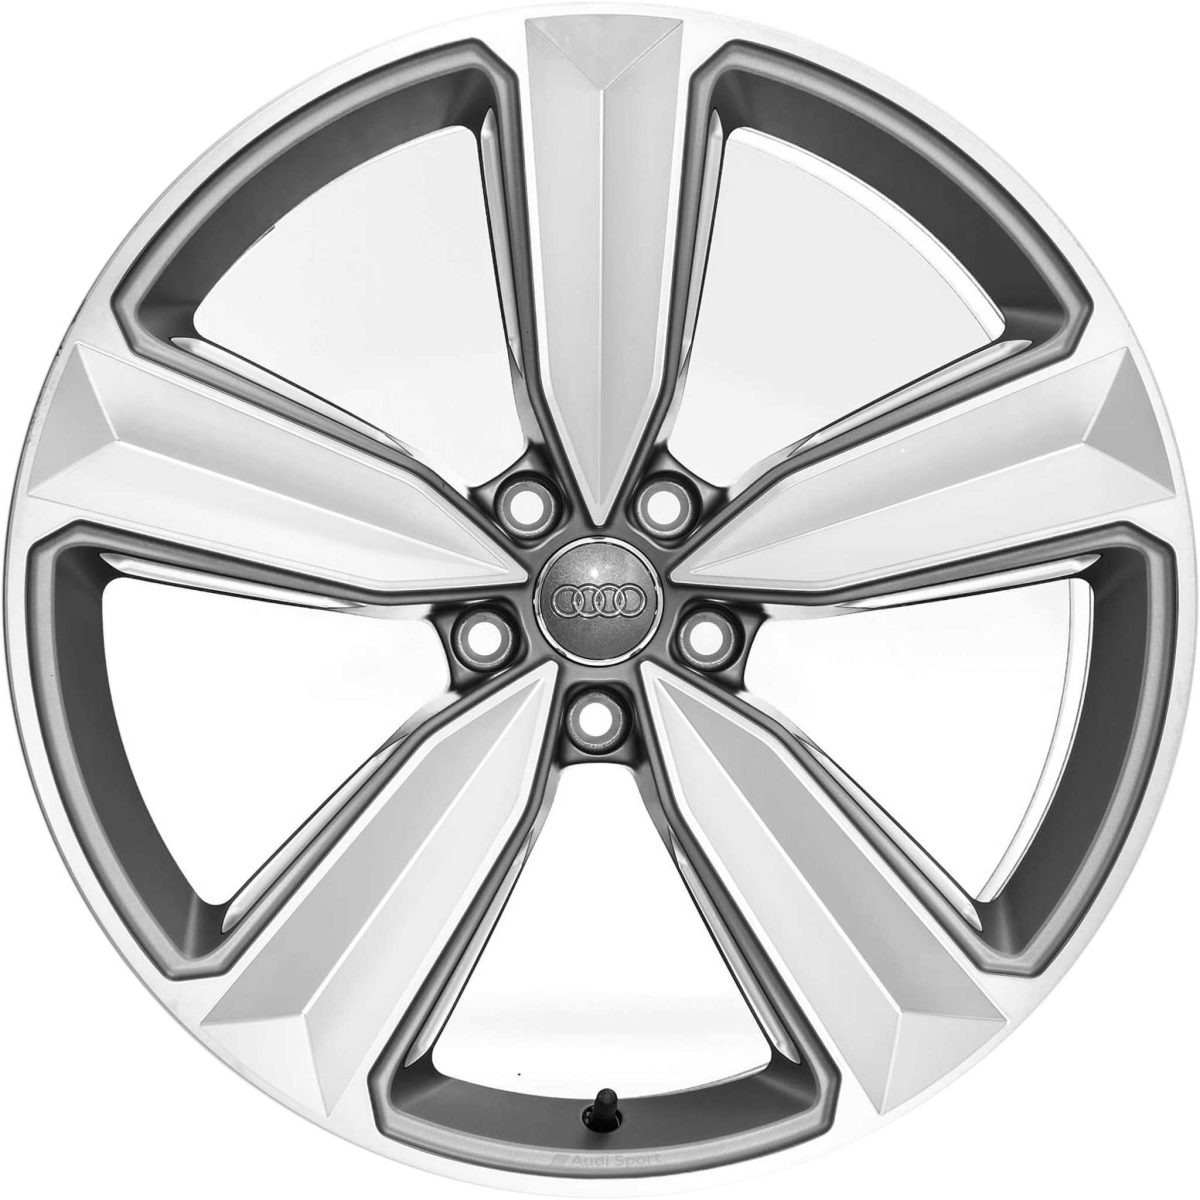 Genuine Audi RS4 8W 5 Spoke 20" Inch Alloy Wheels With Grey and Diamond Turned Finish 8W0 601 025 FP